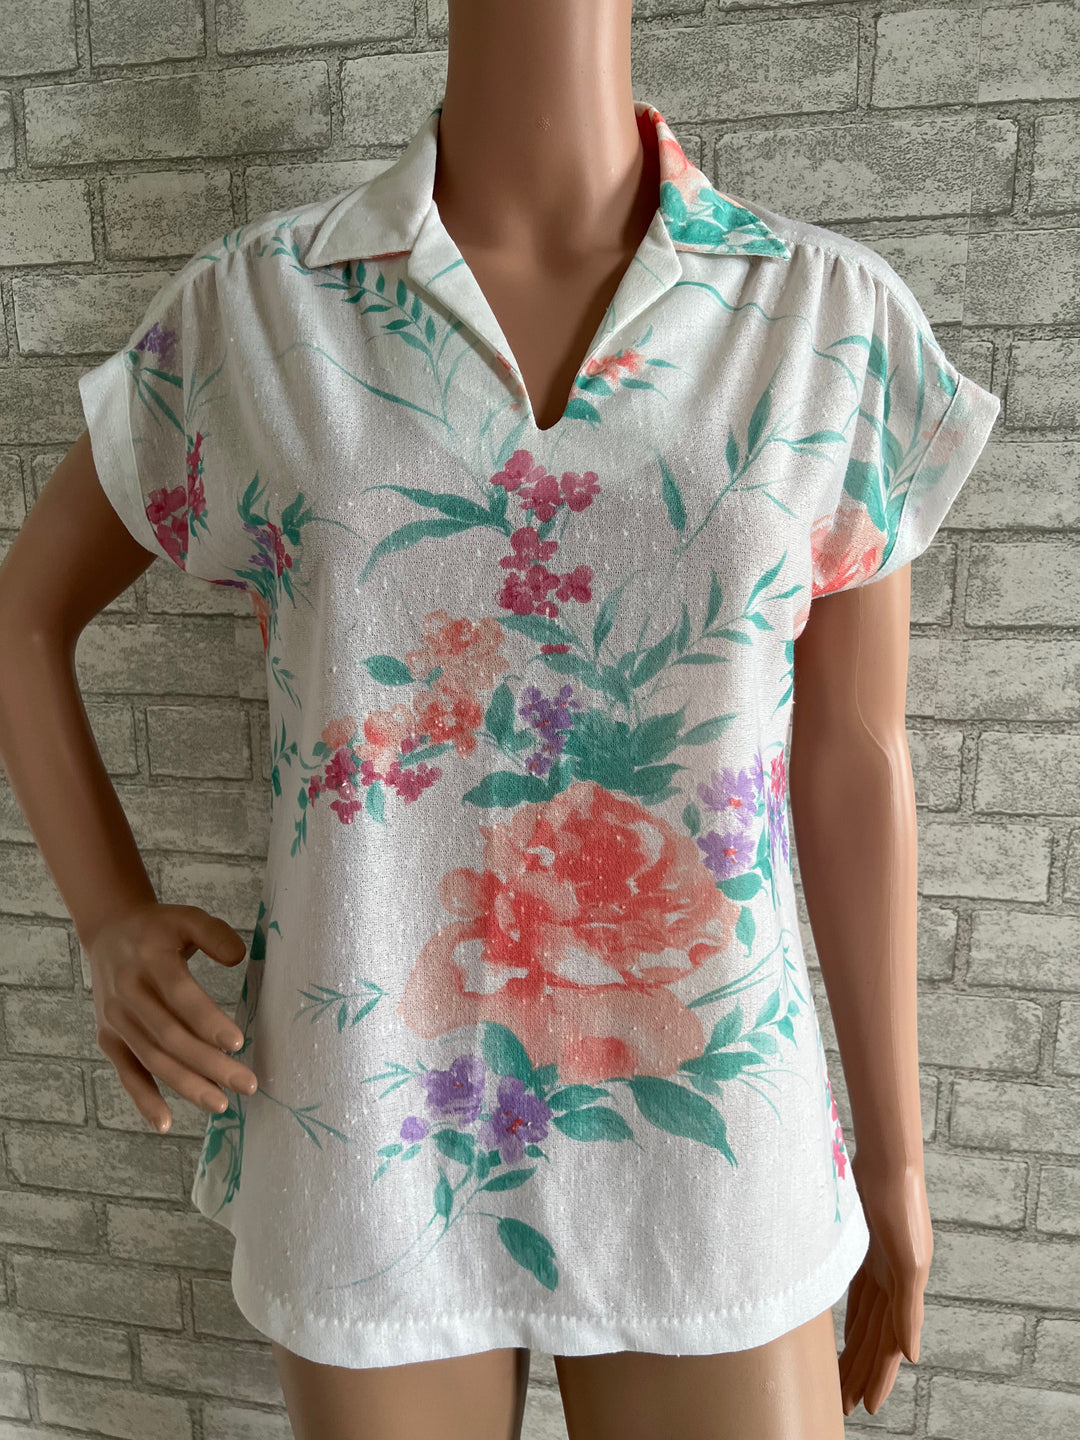 Vintage Thin White Blouse with flowers